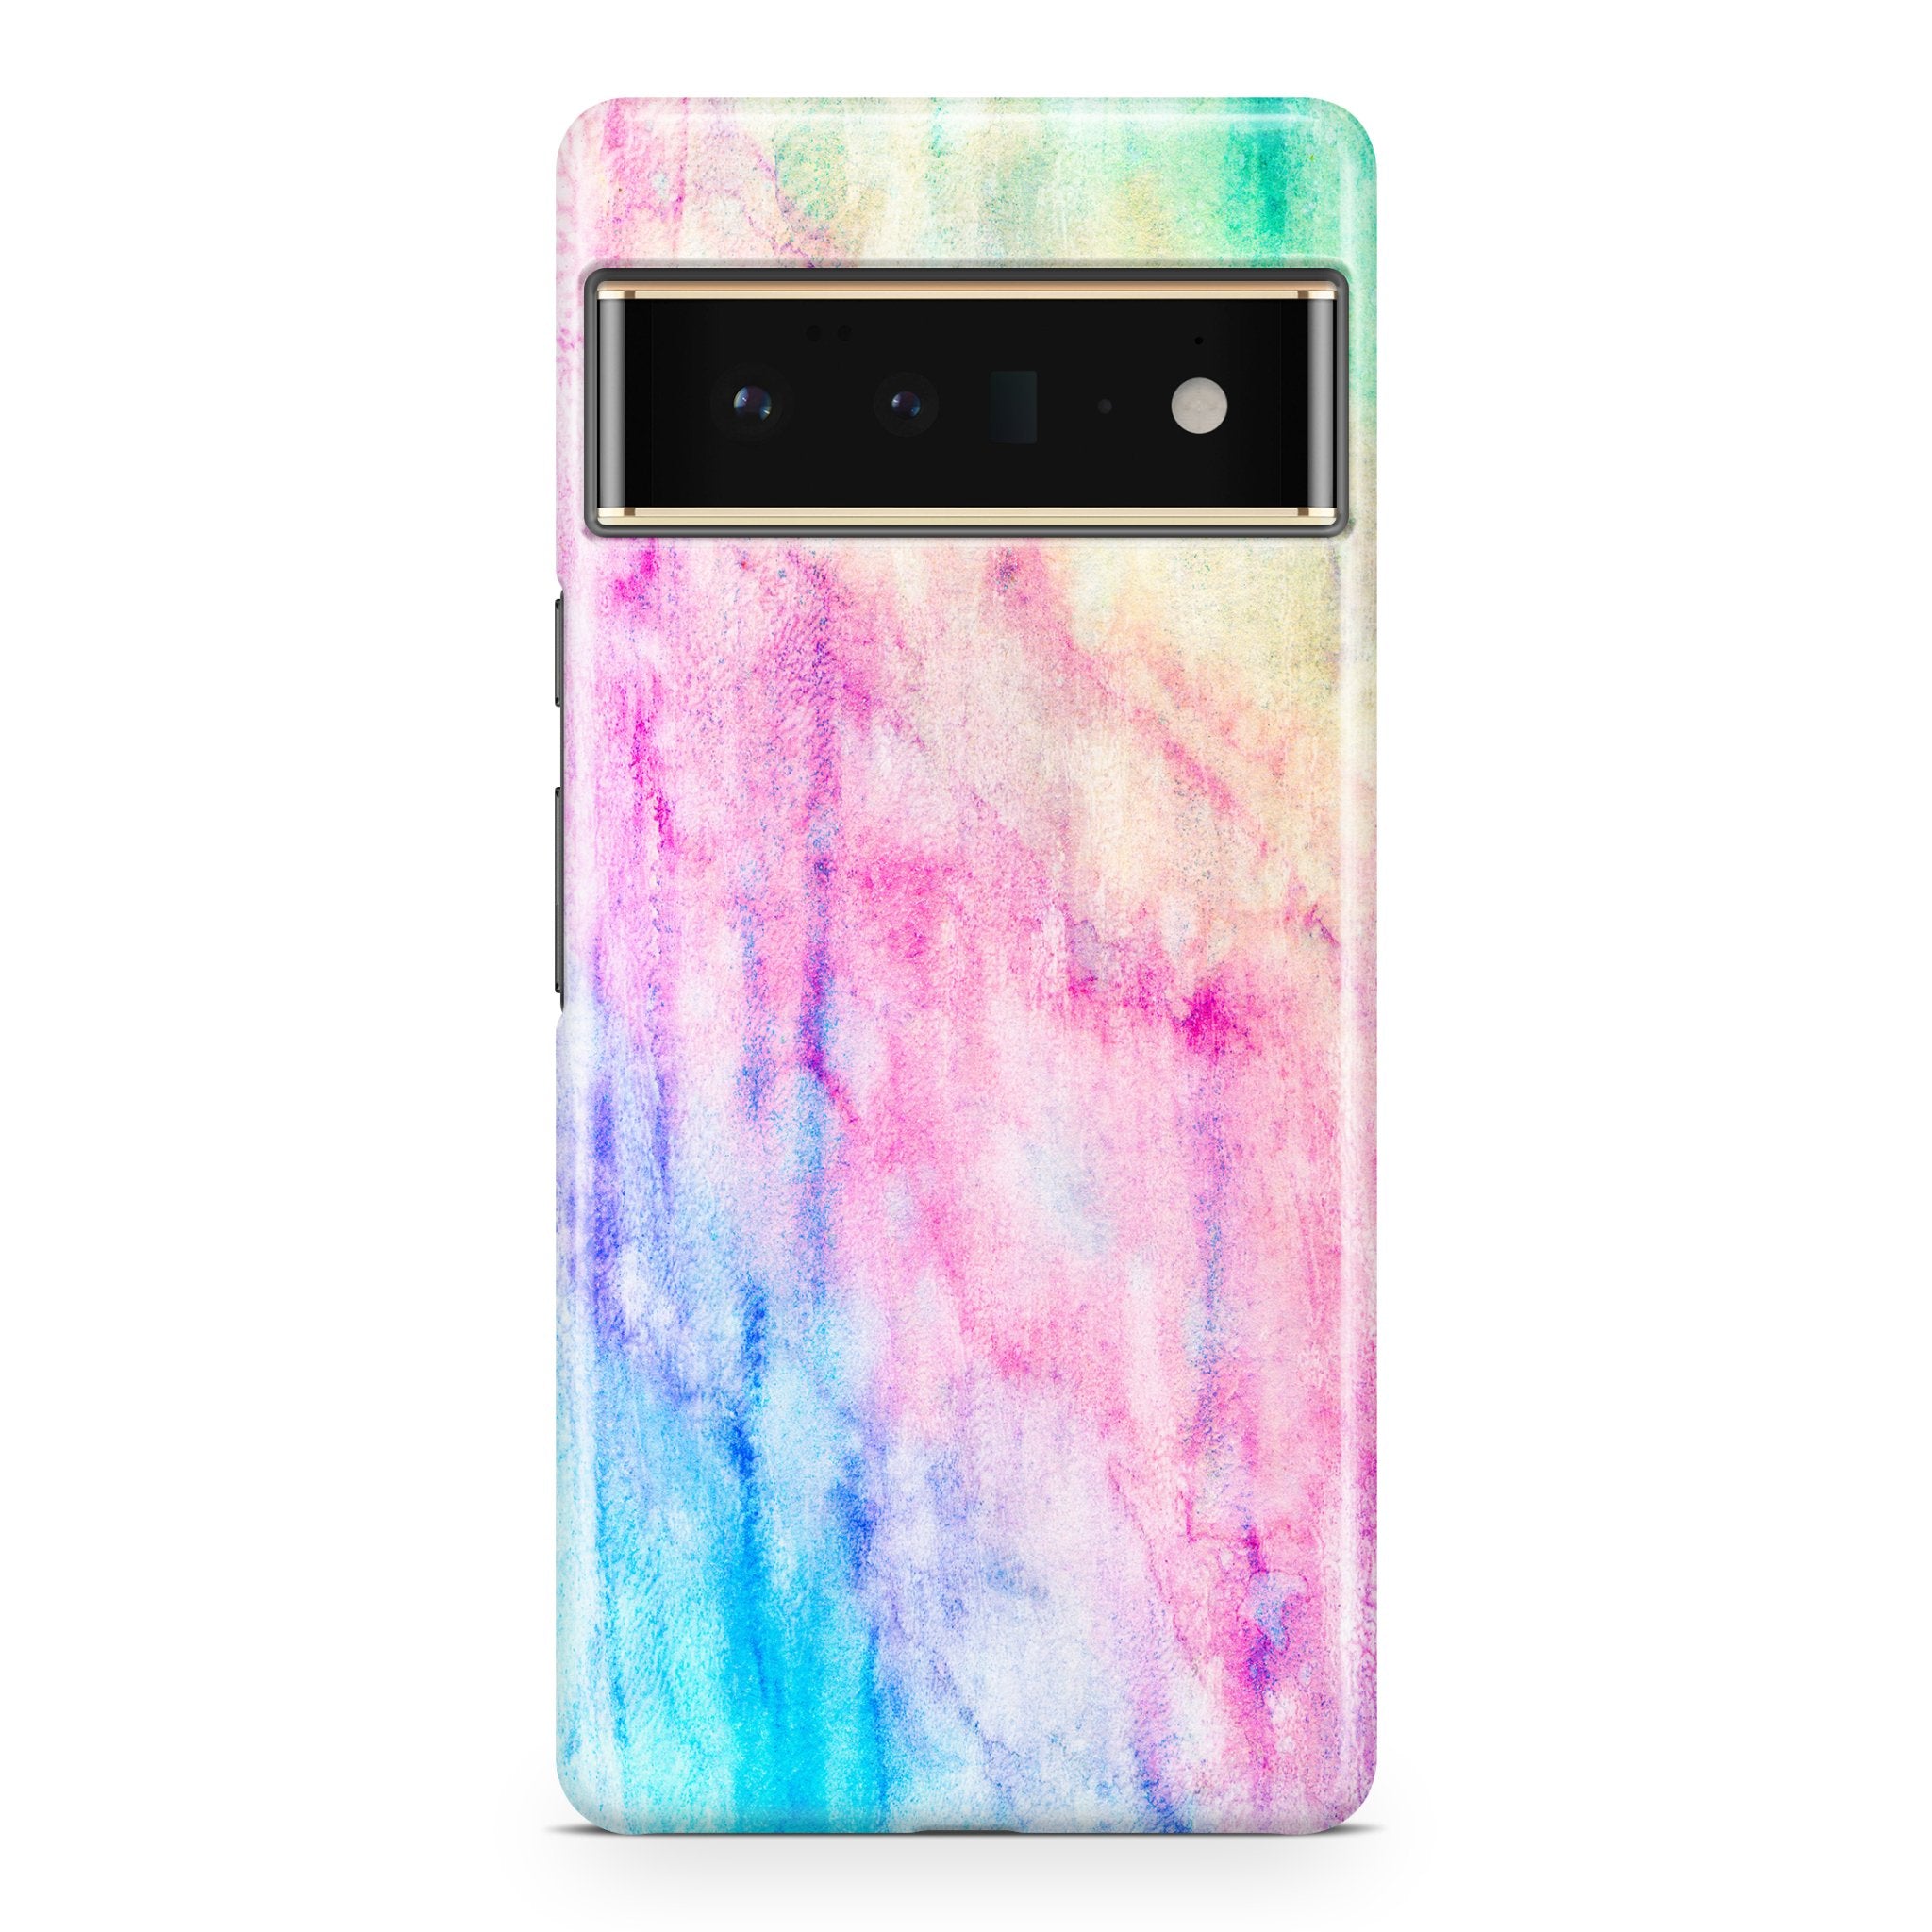 Fading Rainbow - Google phone case designs by CaseSwagger